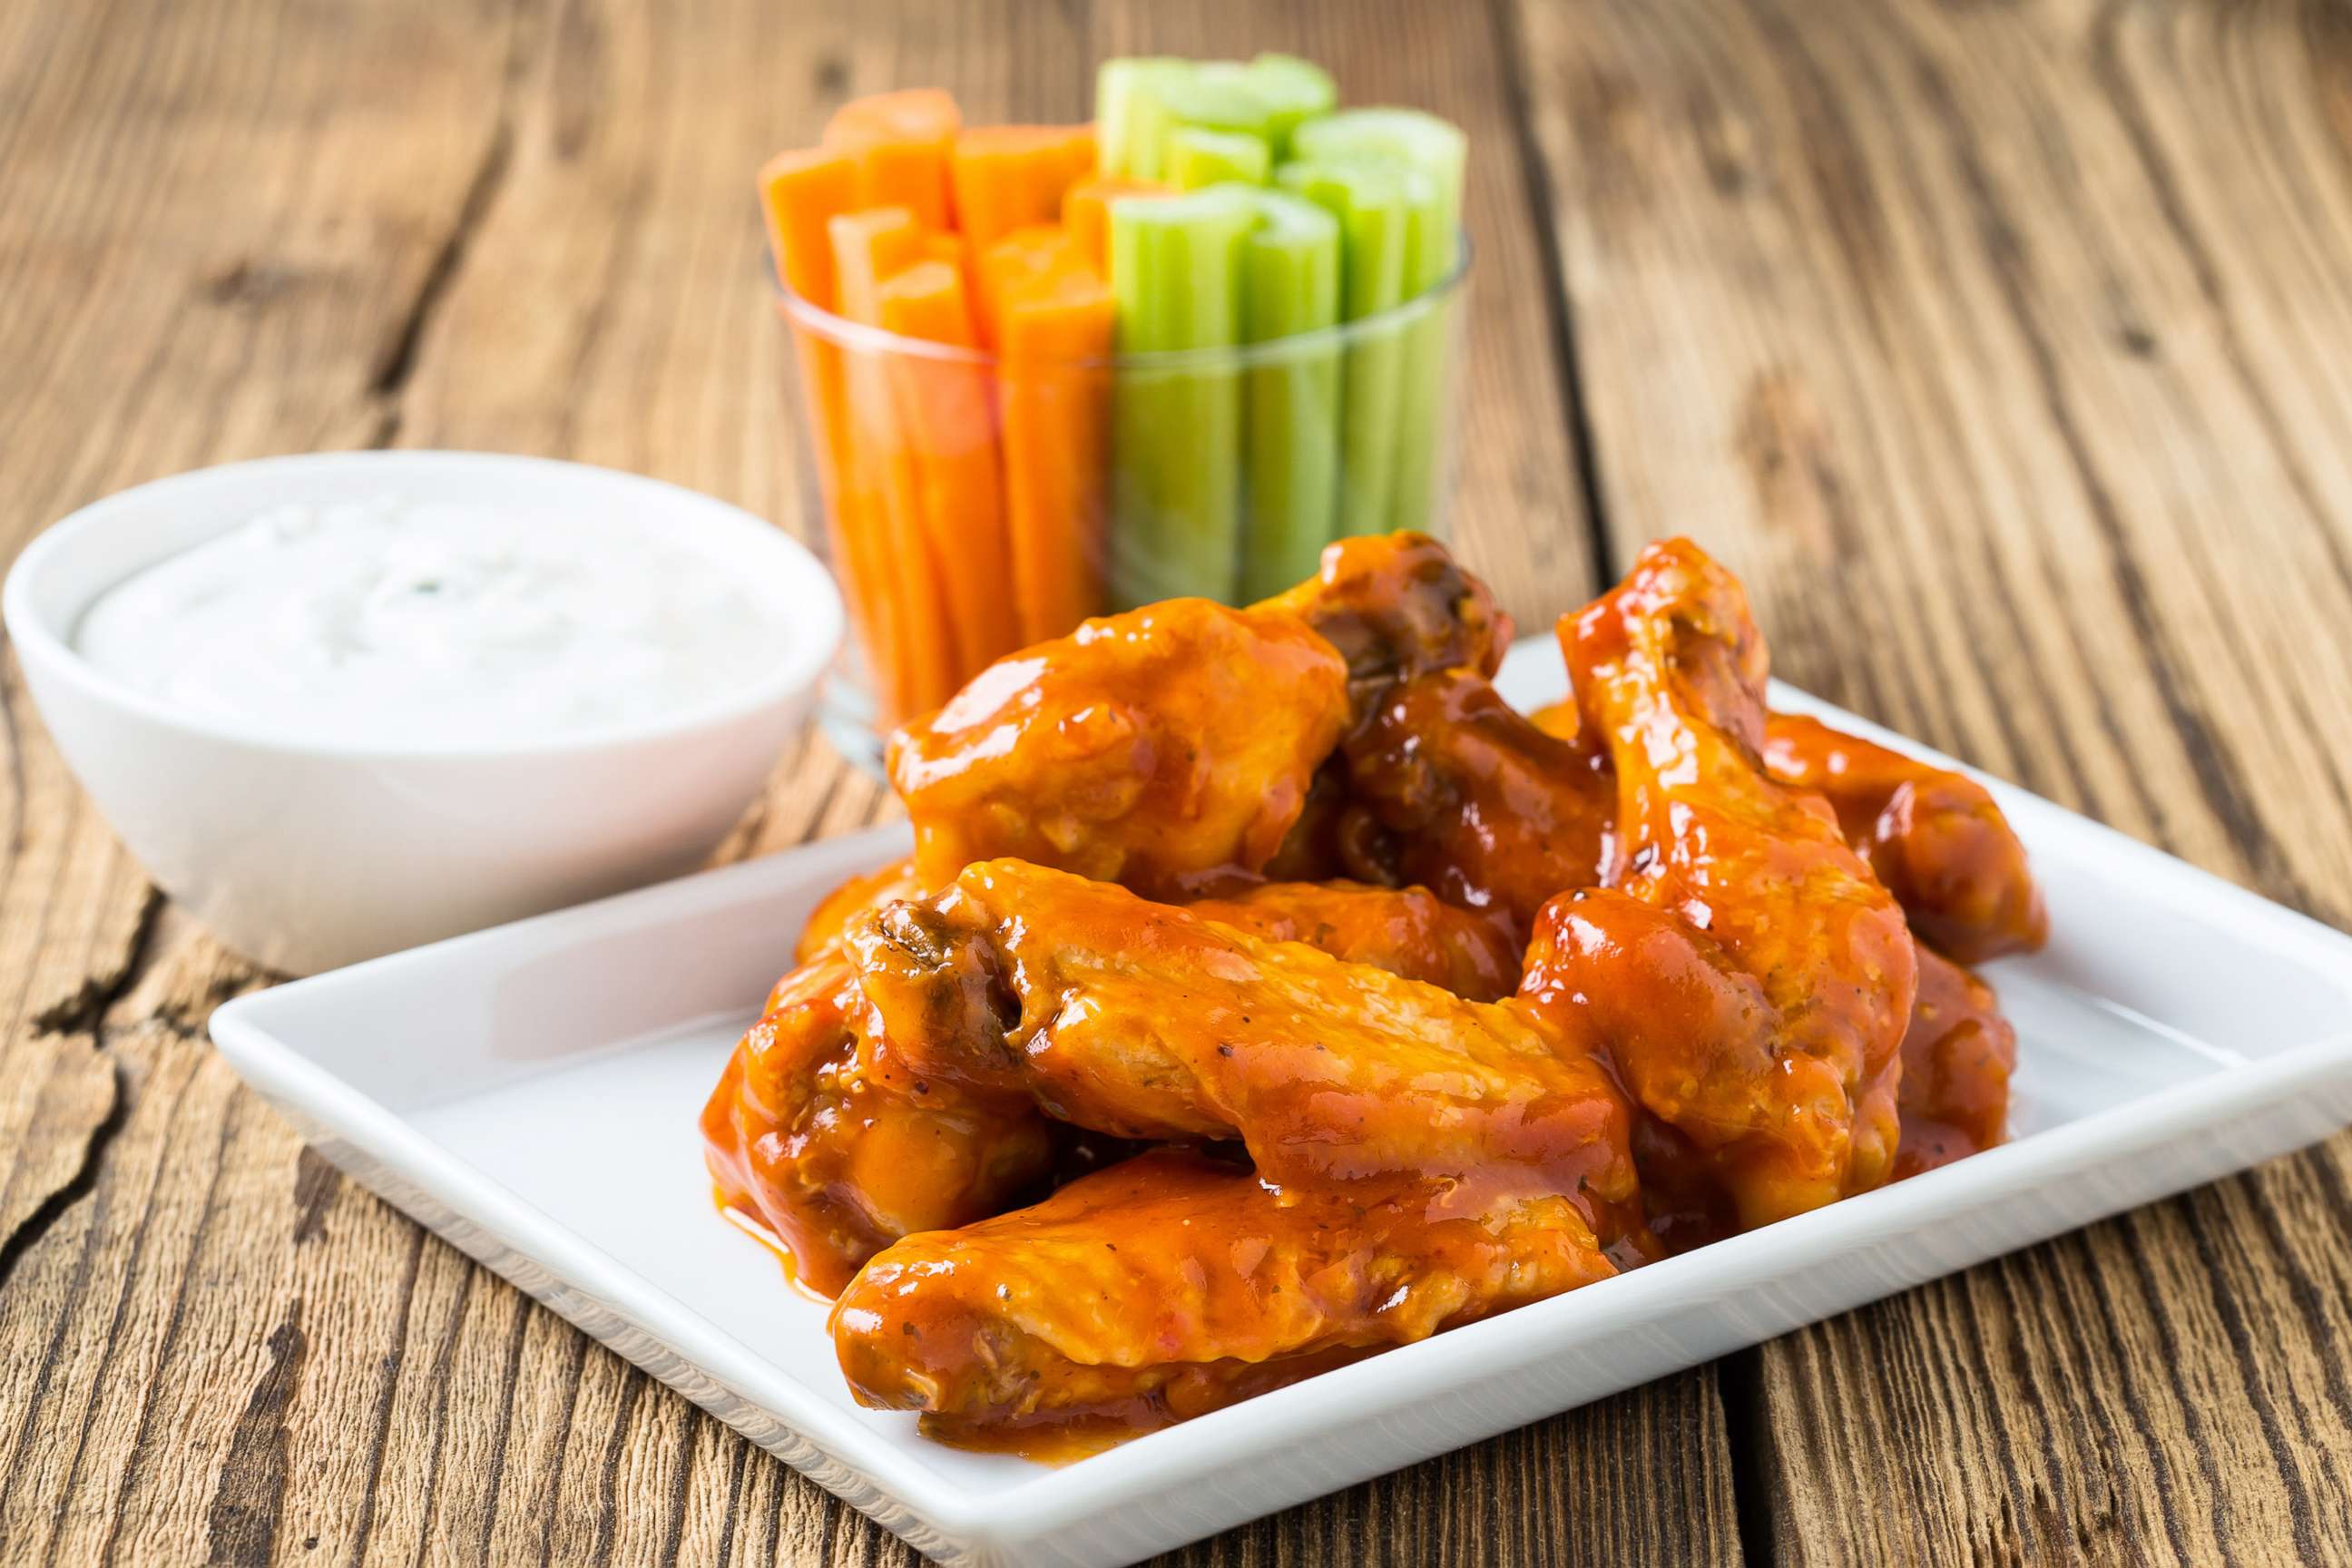 PHOTO: Buffalo chicken wings are served with celery sticks, carrot sticks and blue cheese dressing for dipping in a stock image.